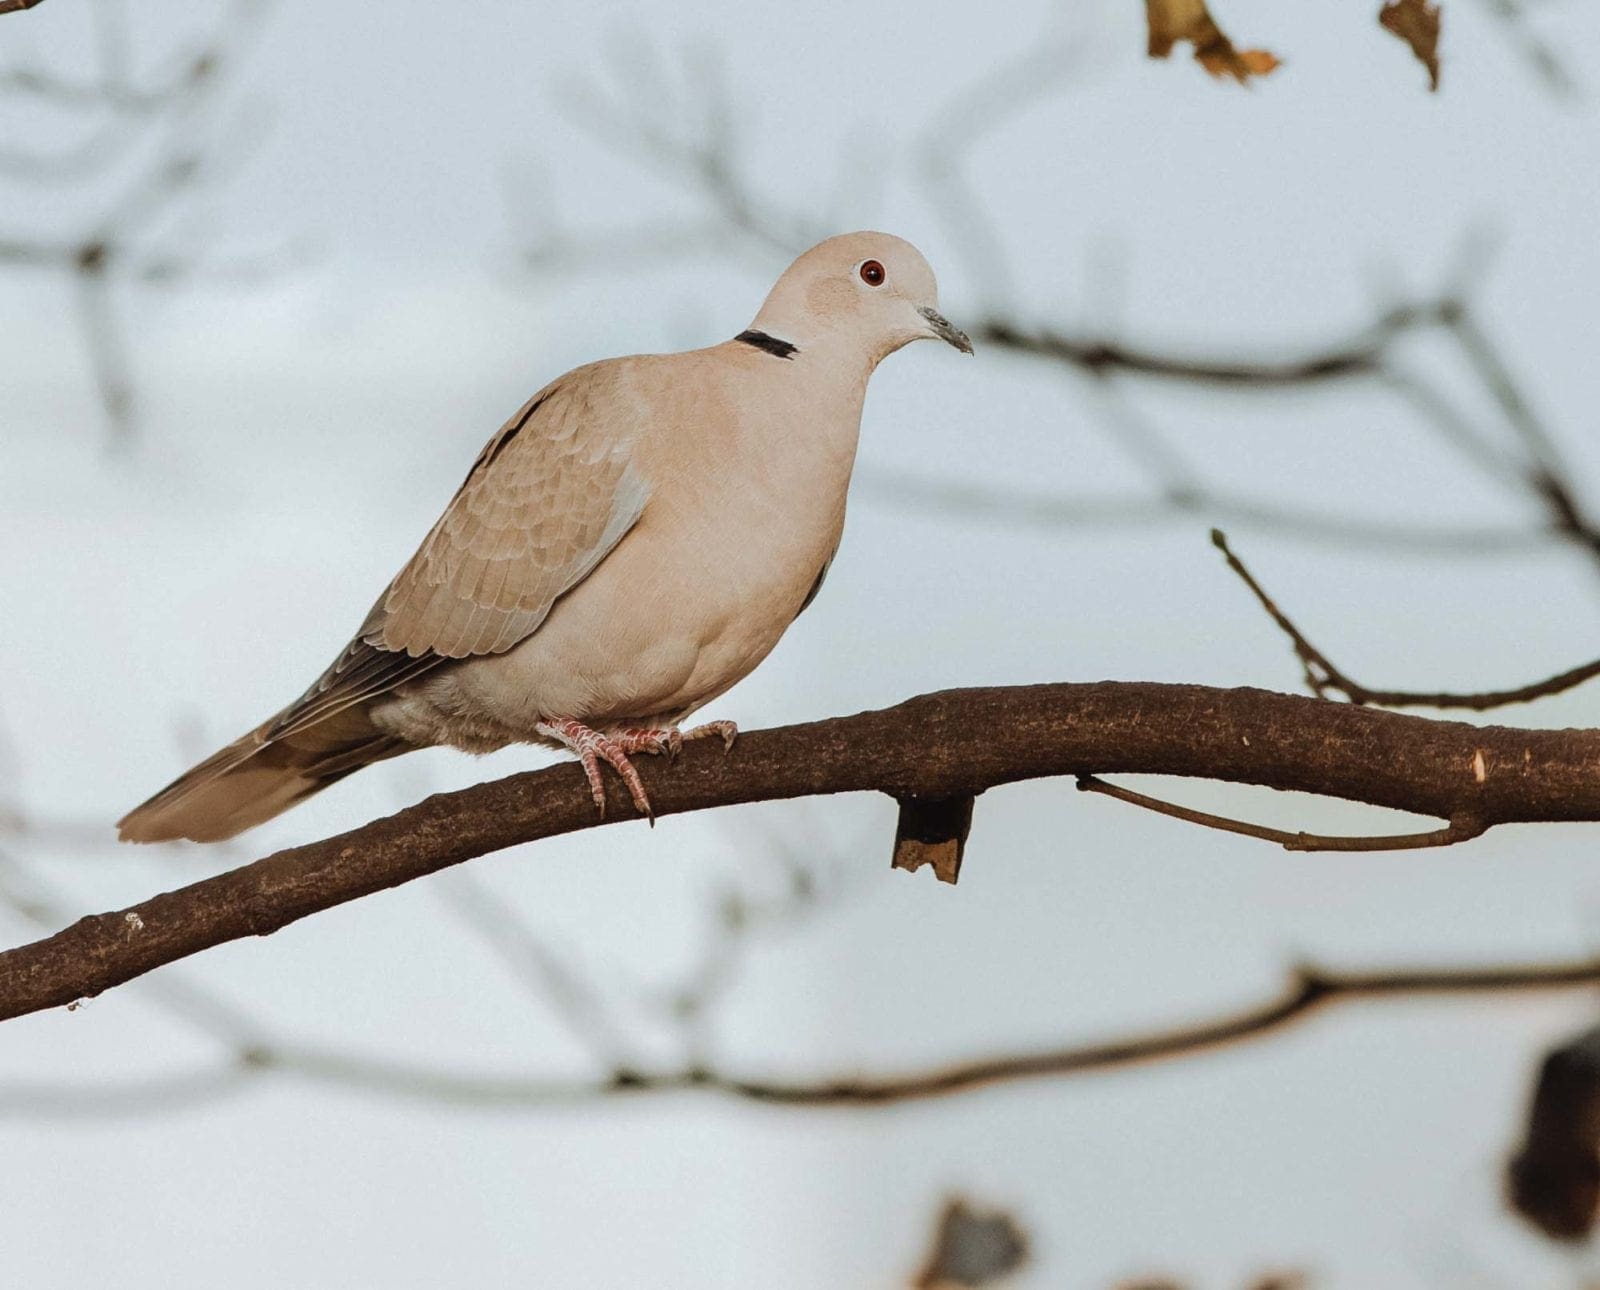 A Eurasian Collared-Dove sits on a branch